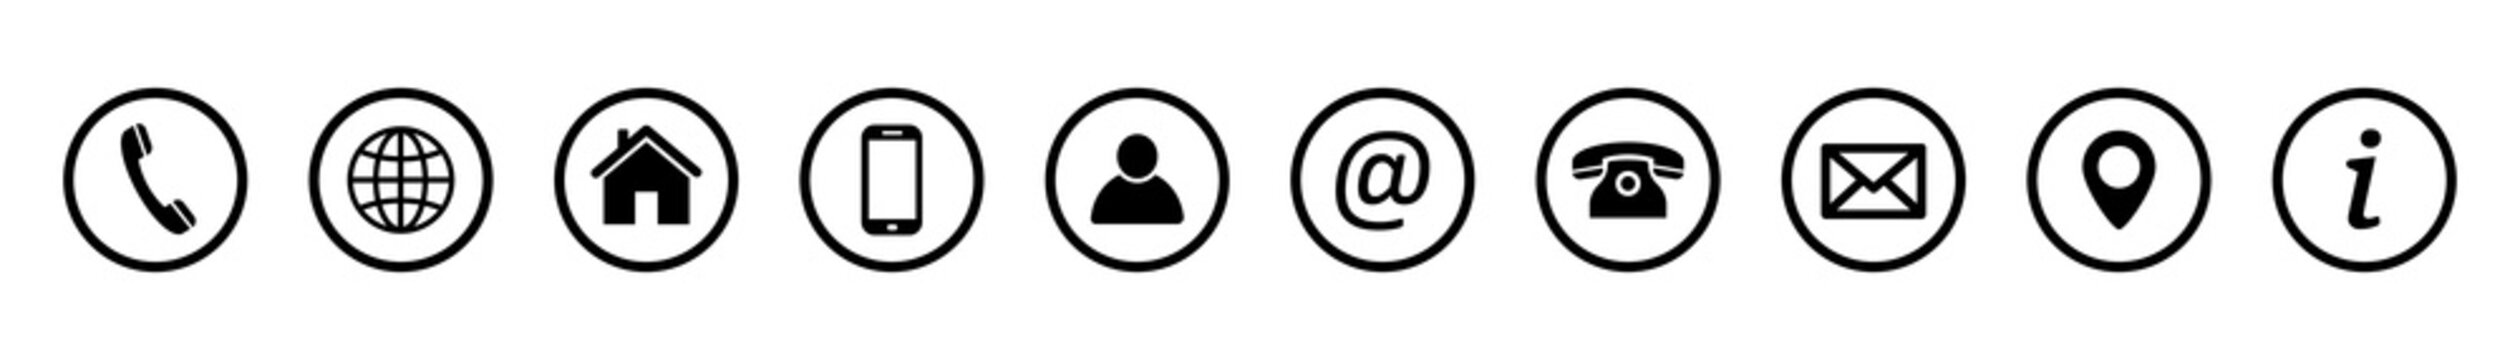 Contact icons. Contact us – Set of buttons. Web icons . Communication vector illustration.